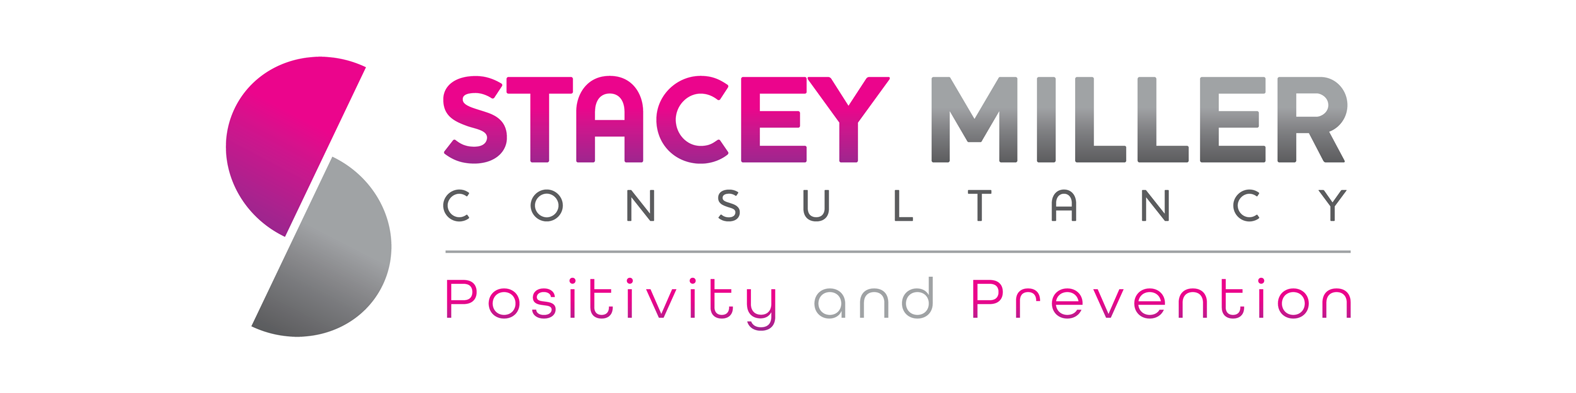 Stacey Miller Consultancy | Substance Misuse and Mental Health Education and Training Consultant